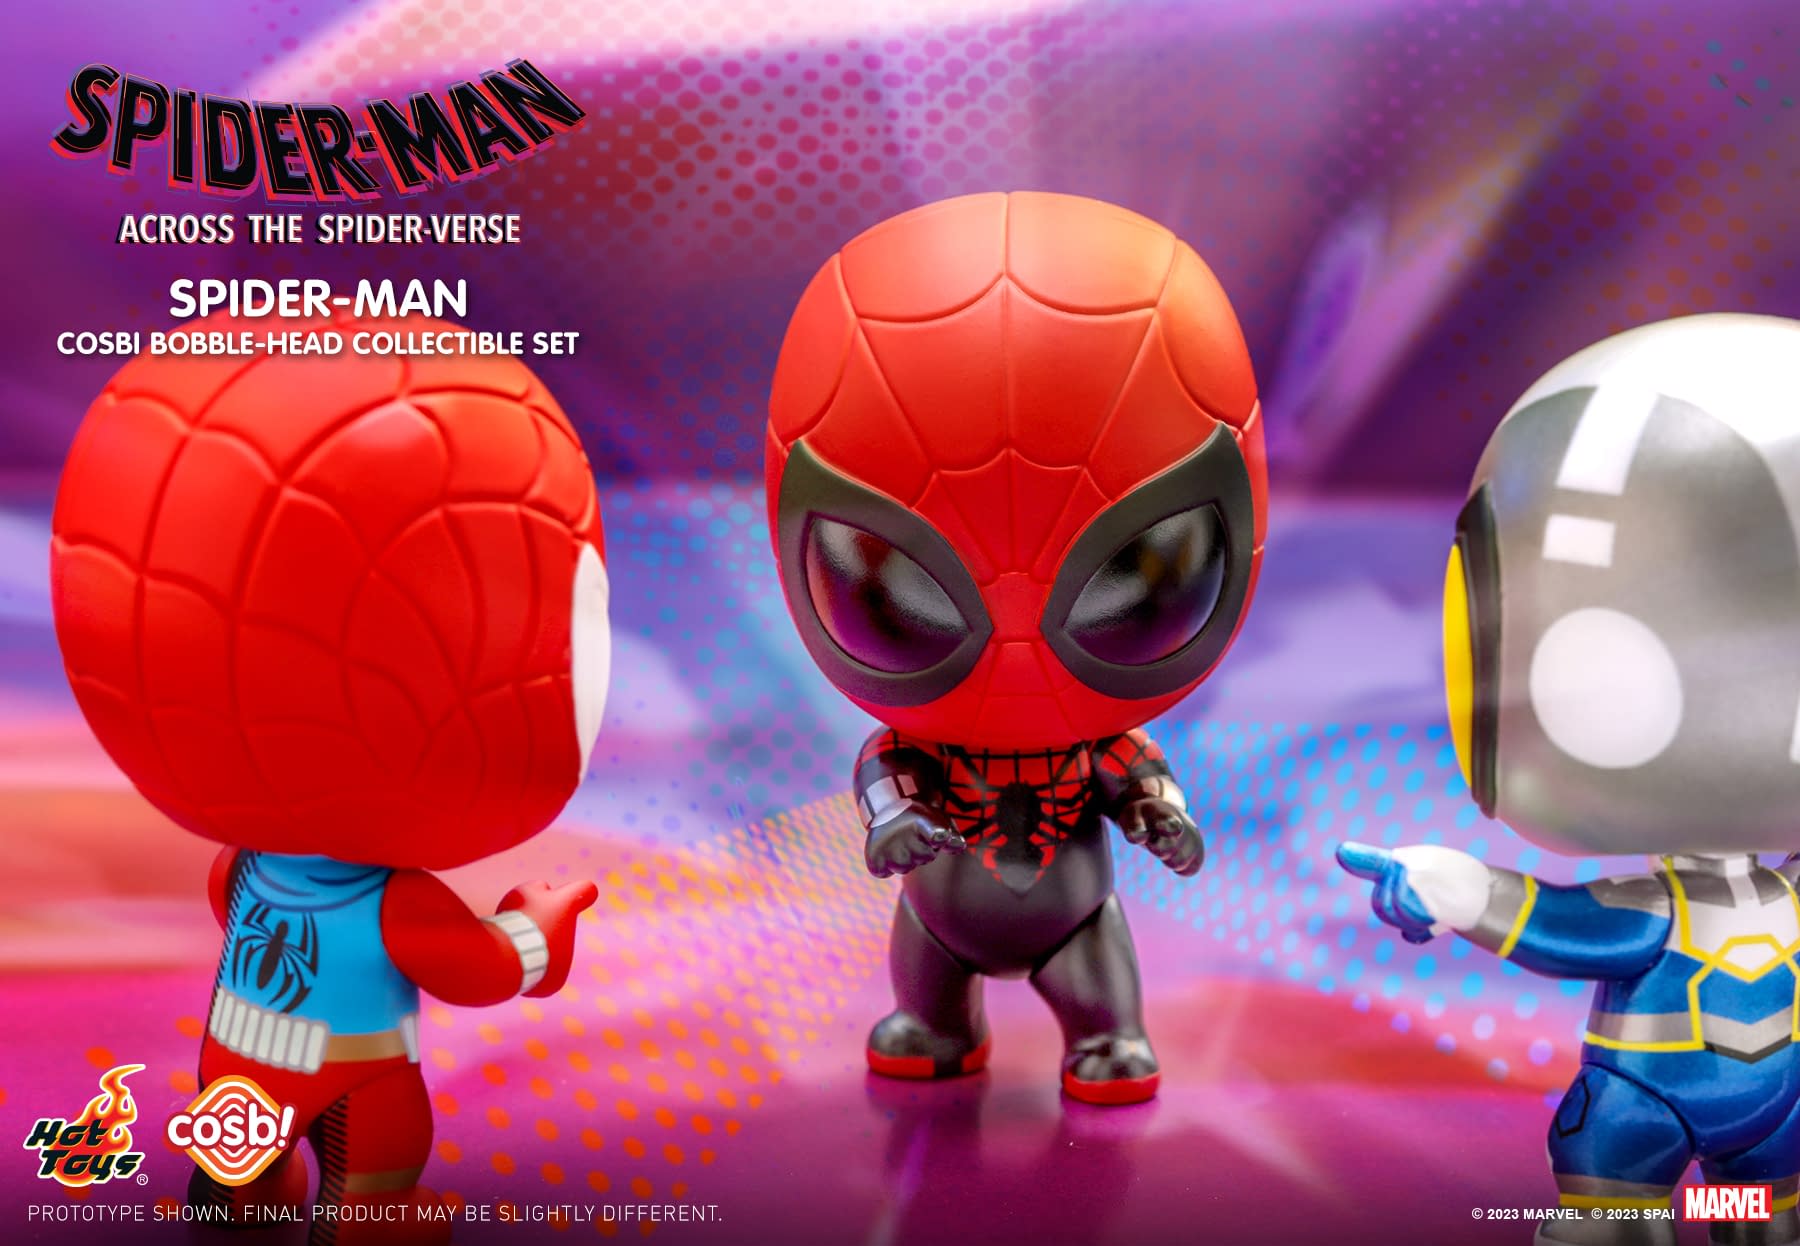 Enter the Spider Society with Hot Toys Newest Spider-Man Cosbi Set7